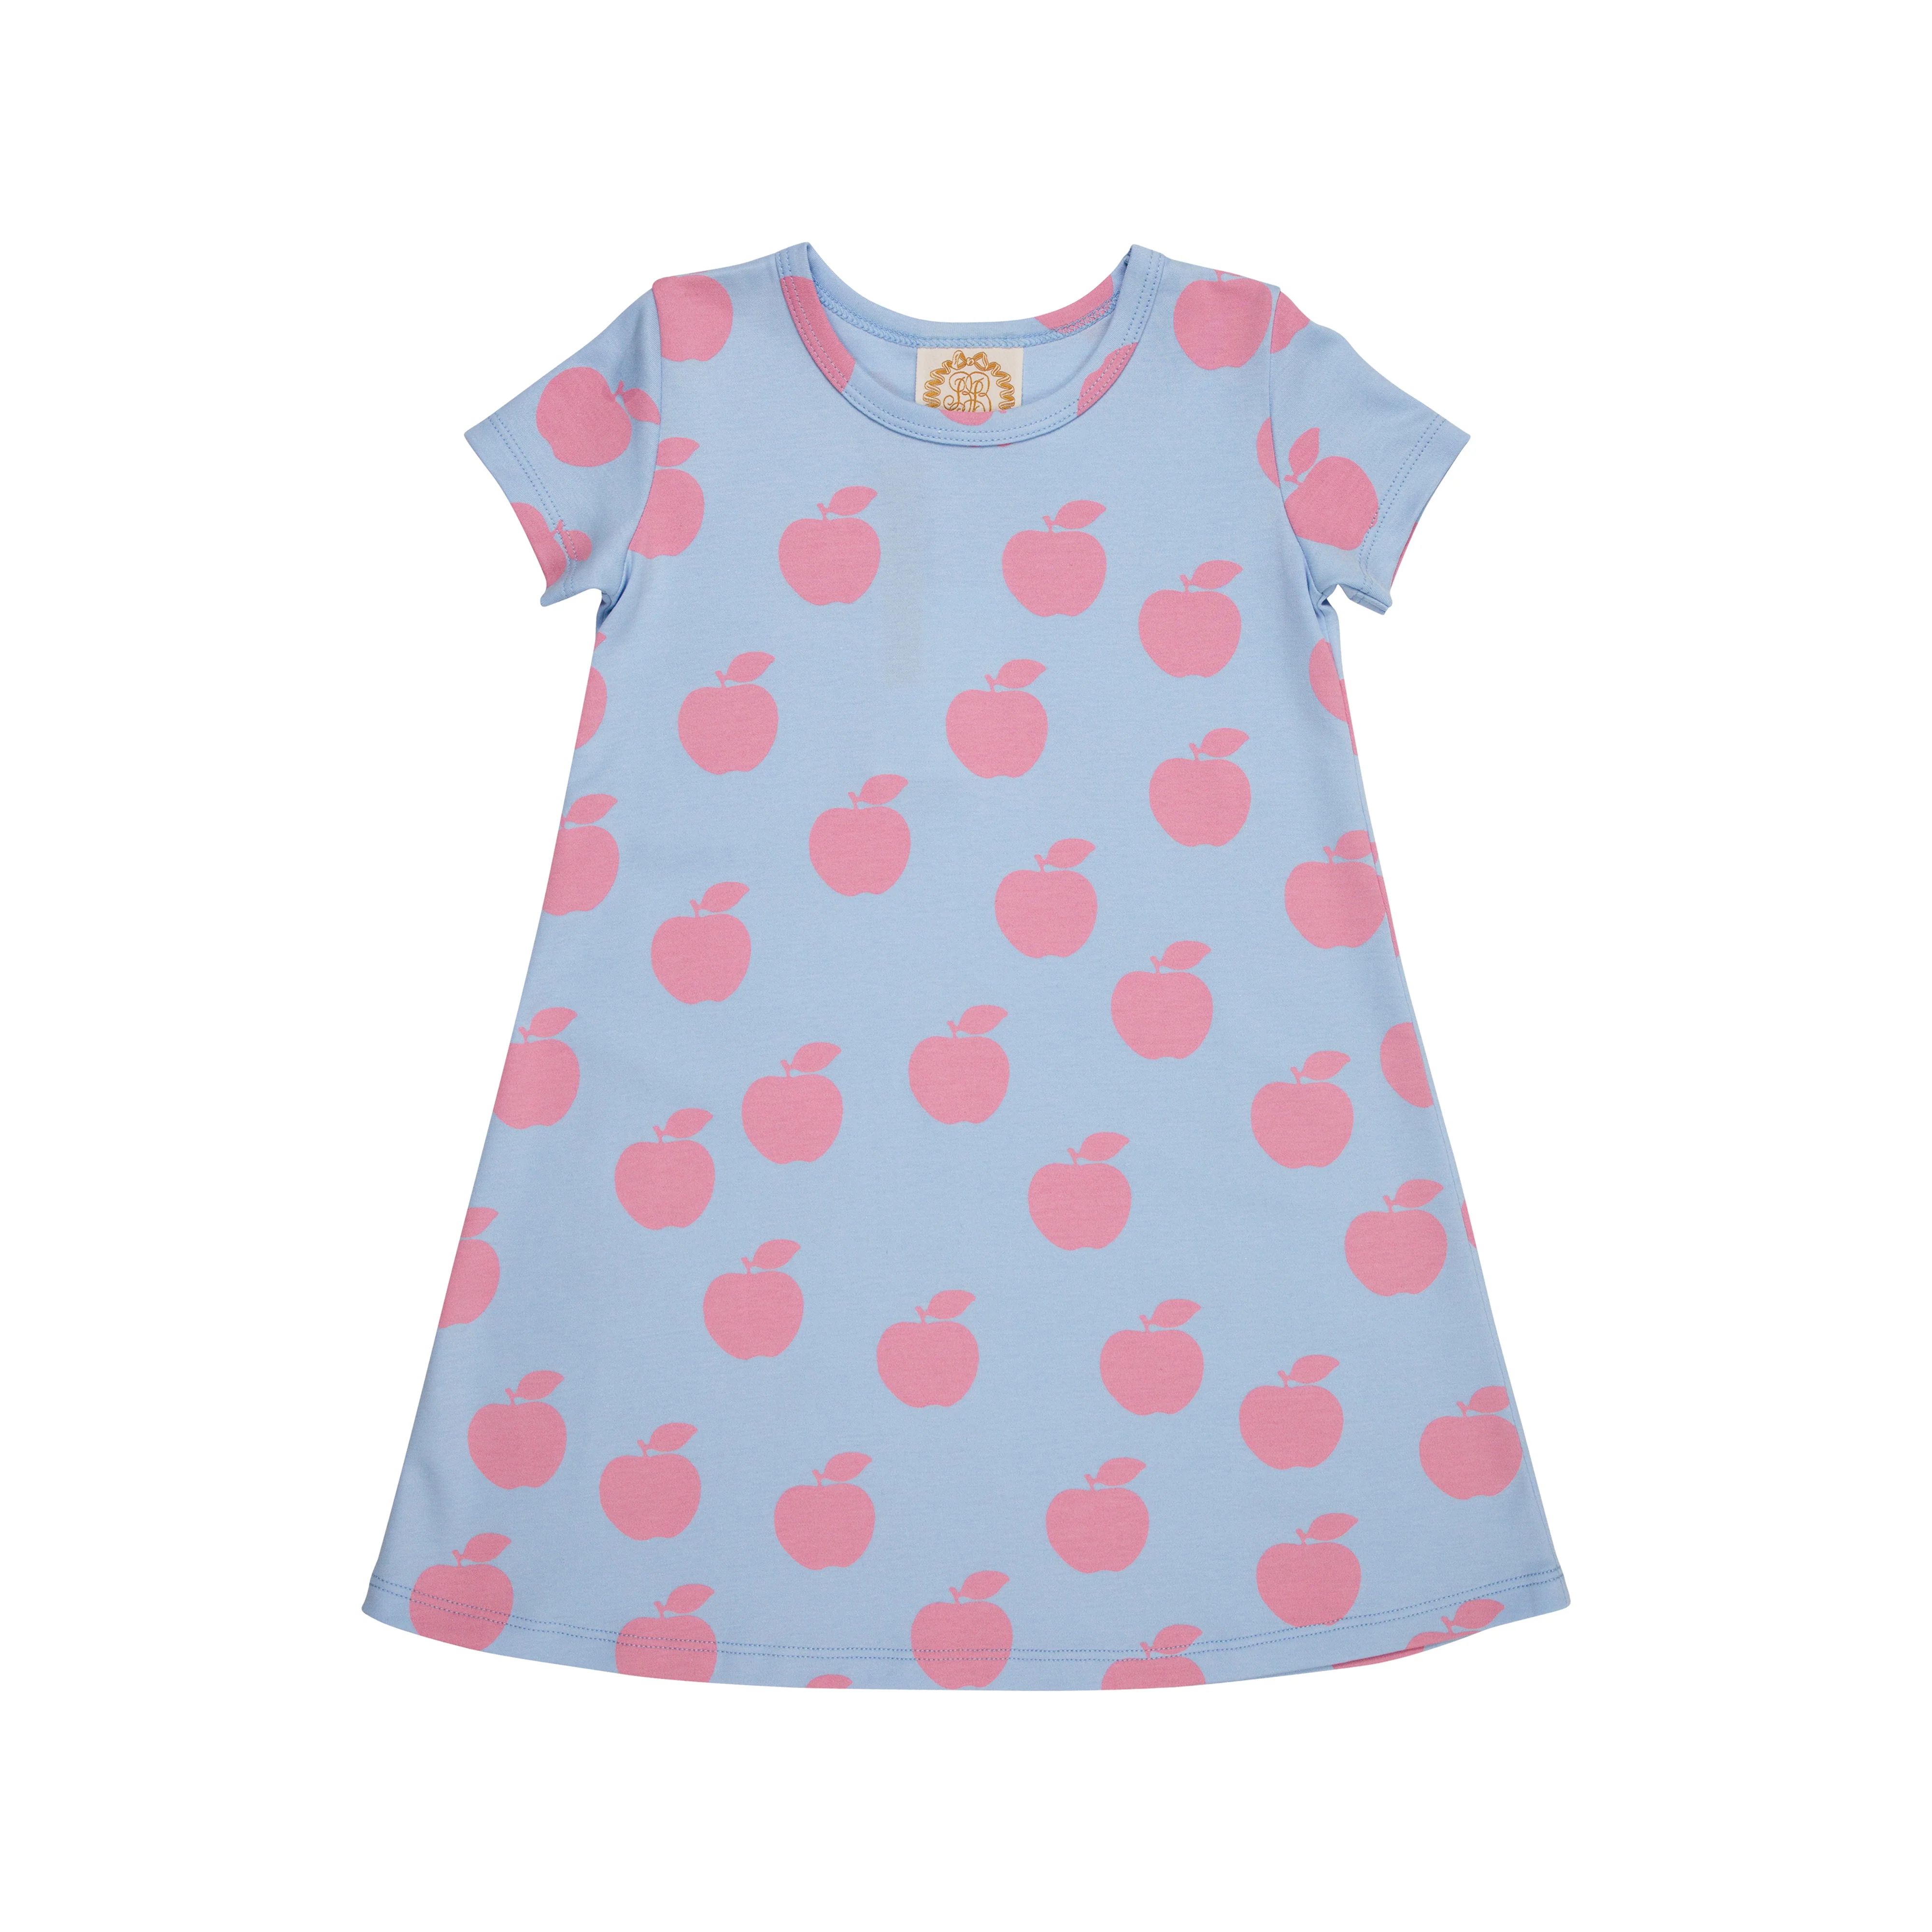 Polly Play Dress - Appleberry Orchard | The Beaufort Bonnet Company